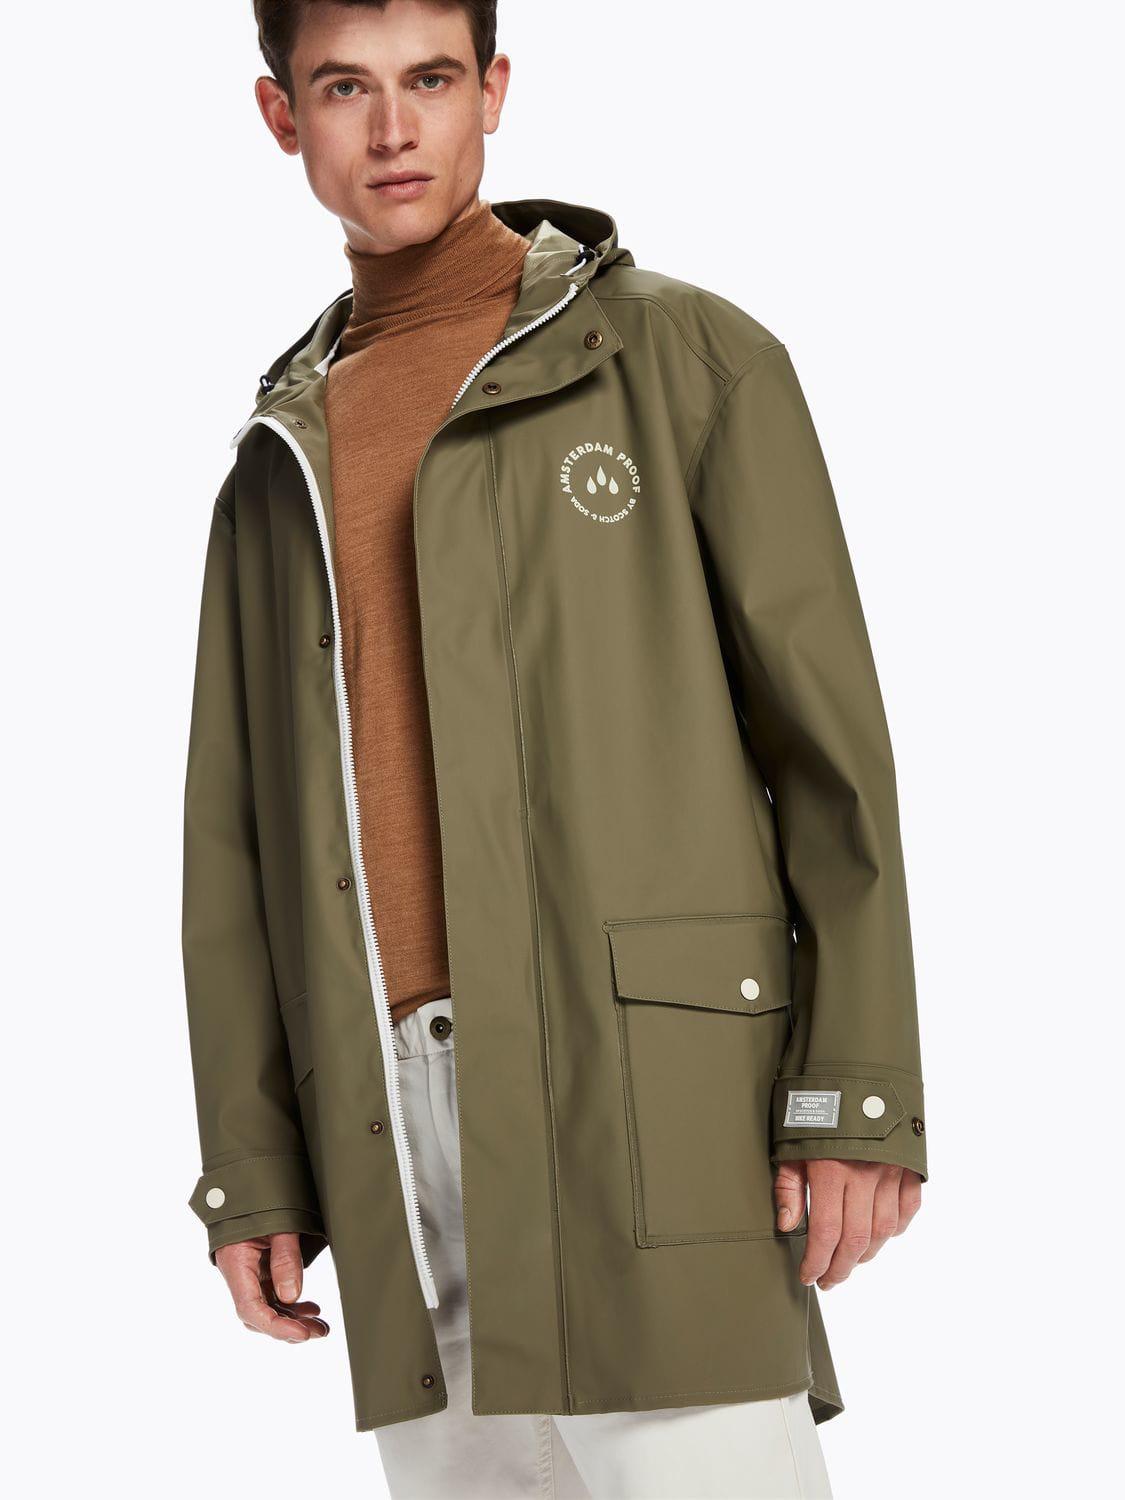 Scotch & Soda Synthetic Rain Parka Amsterdam Proof in Sage (Green) for Men  - Lyst